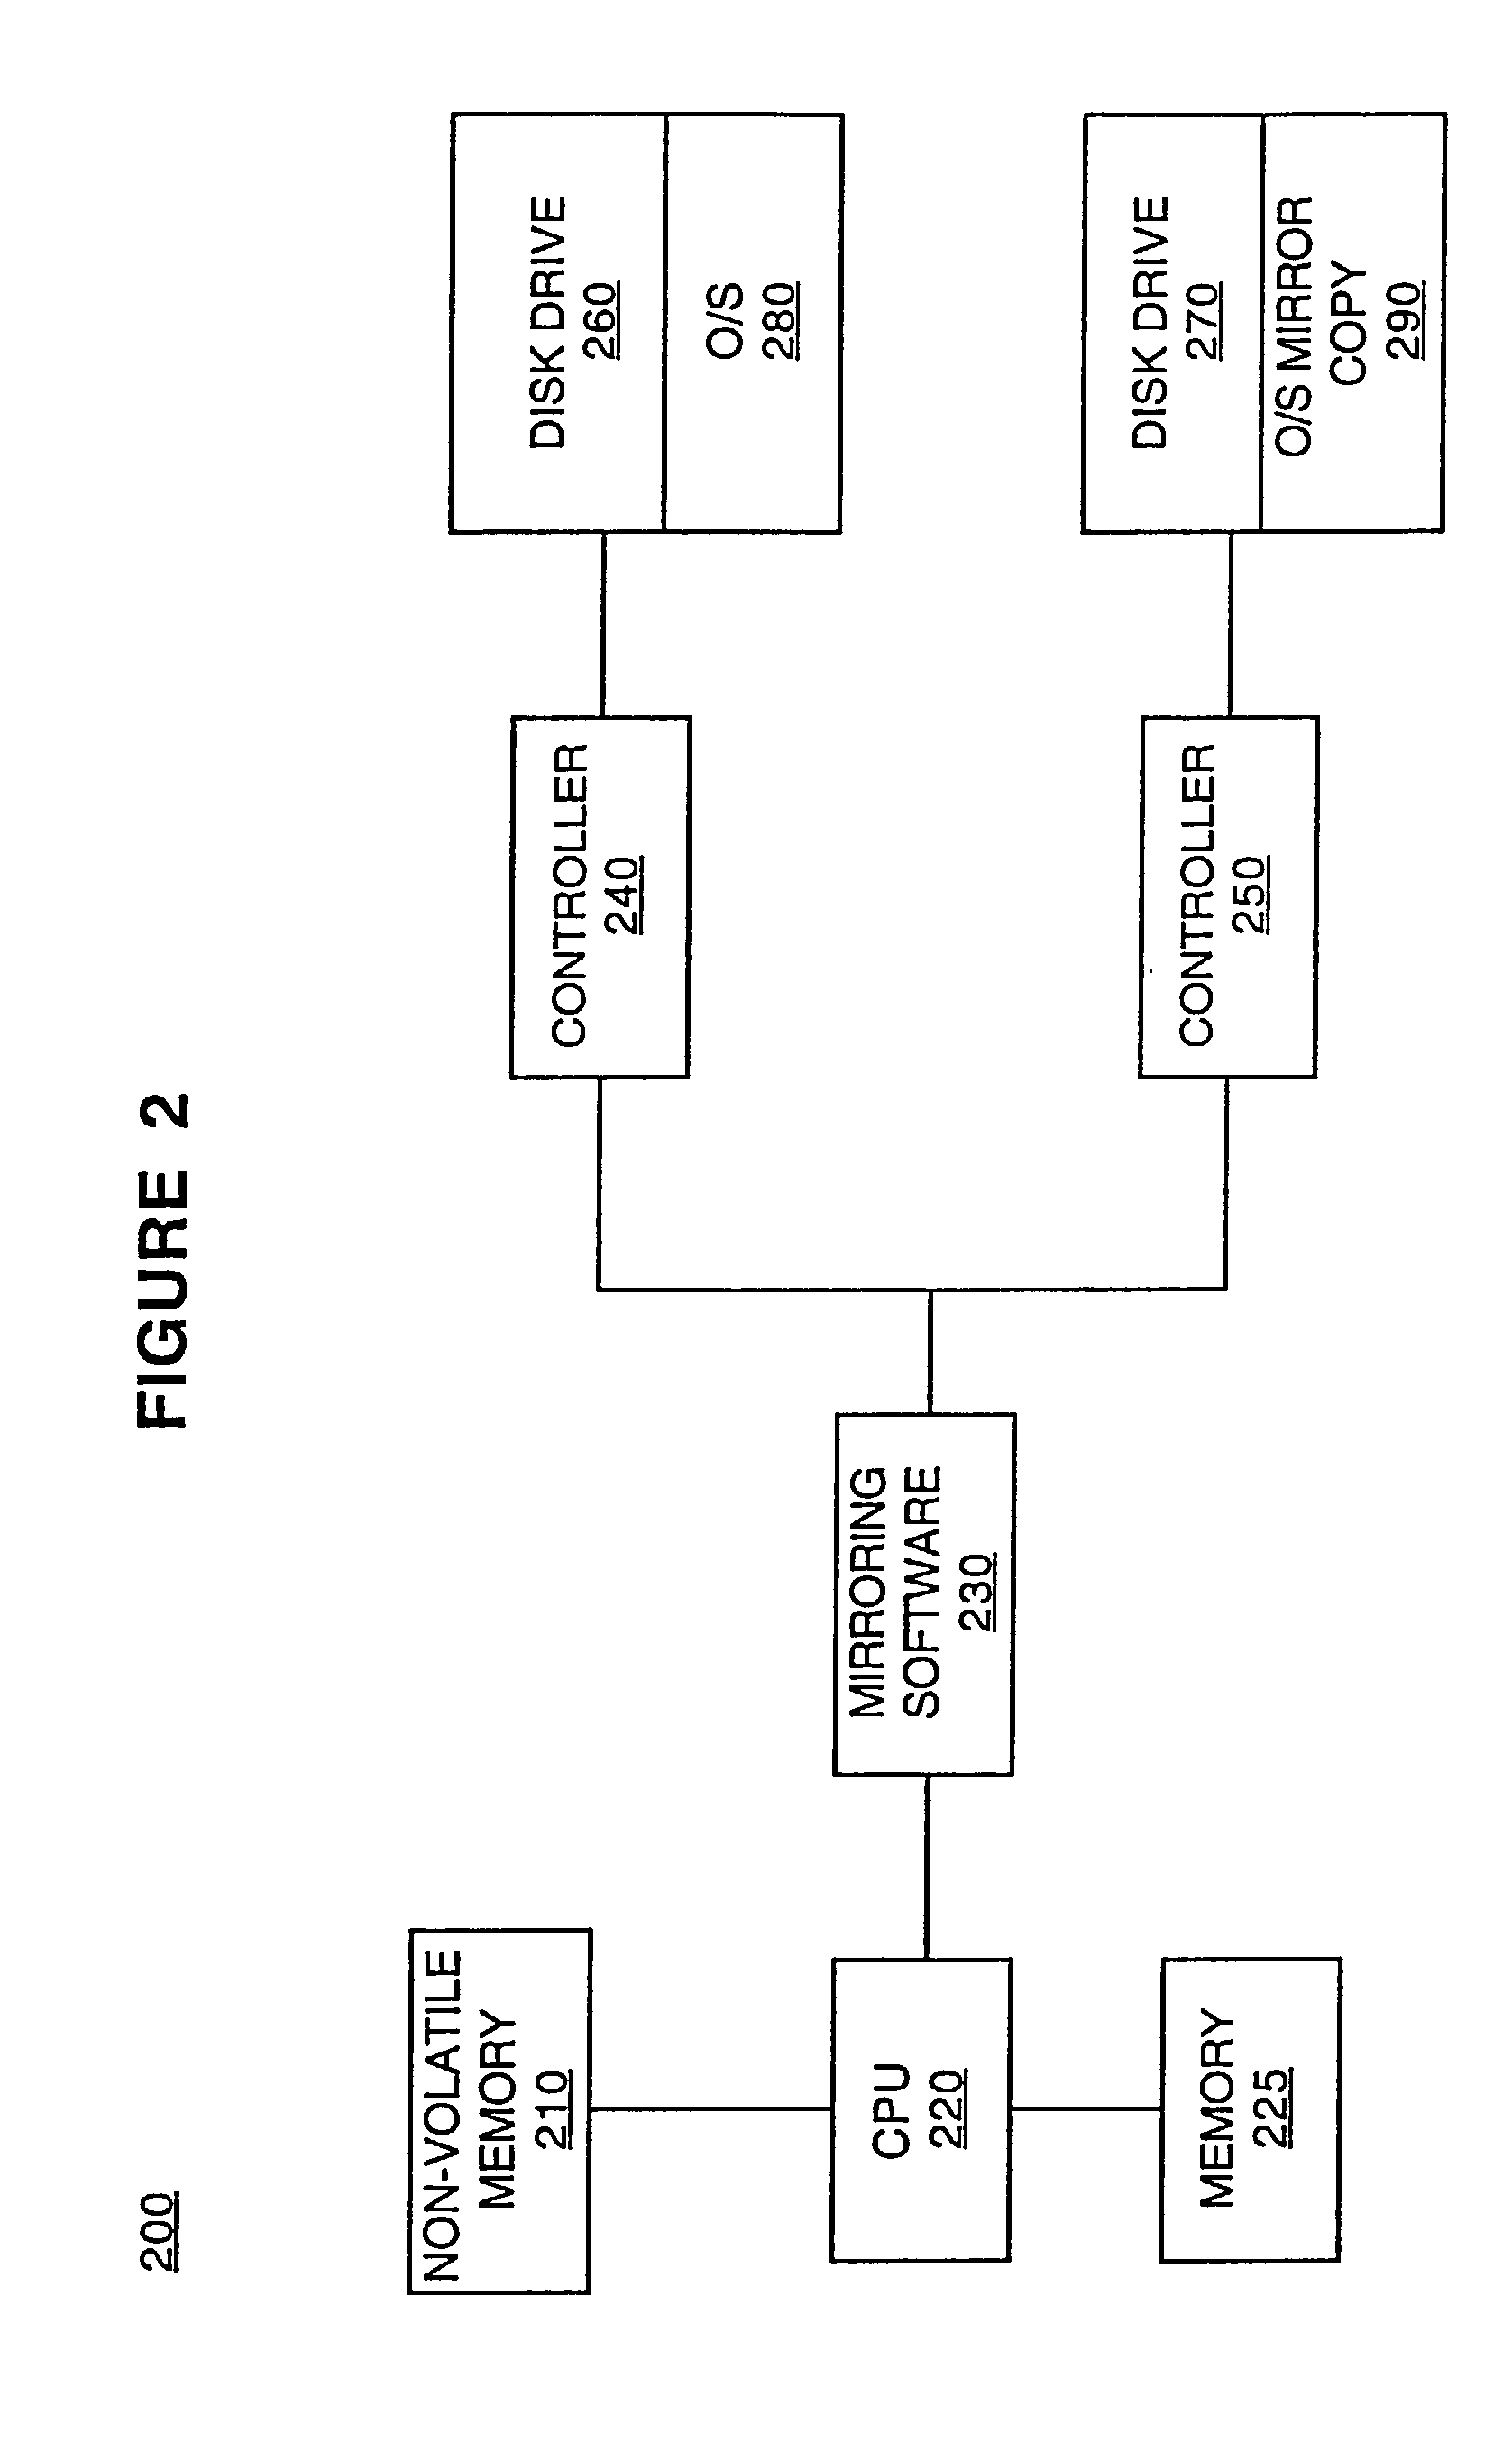 Method for implementing a redundant data storage system